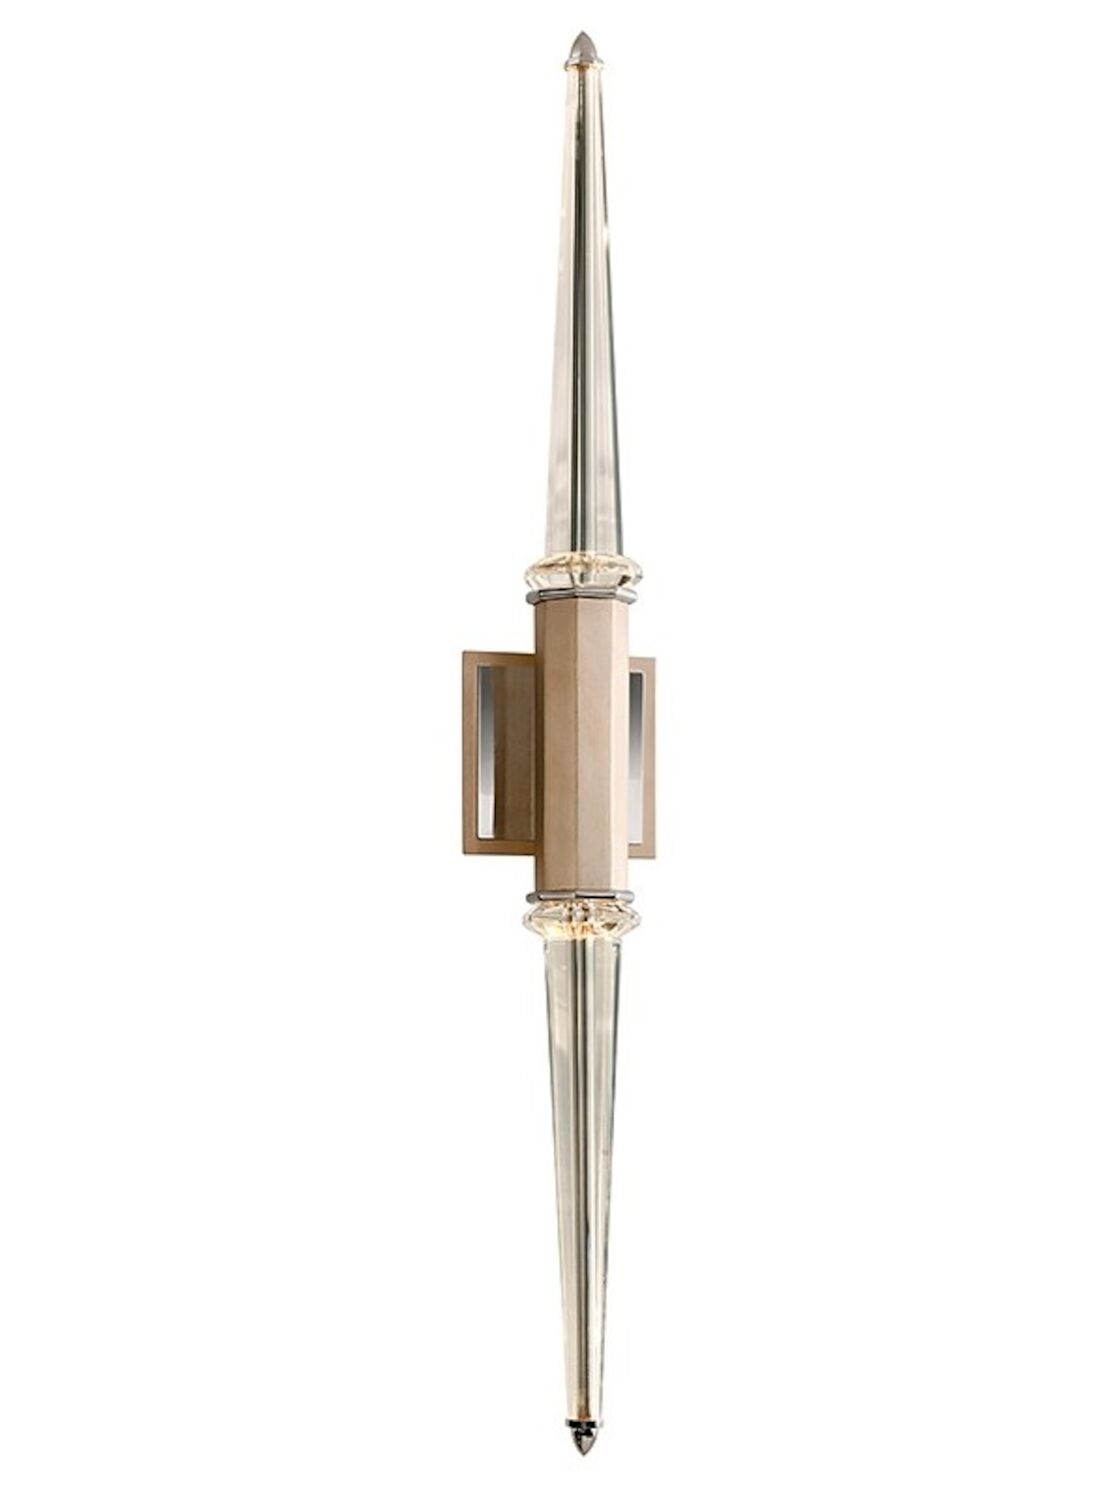 HARLOW 8-LIGHT WALL SCONCE